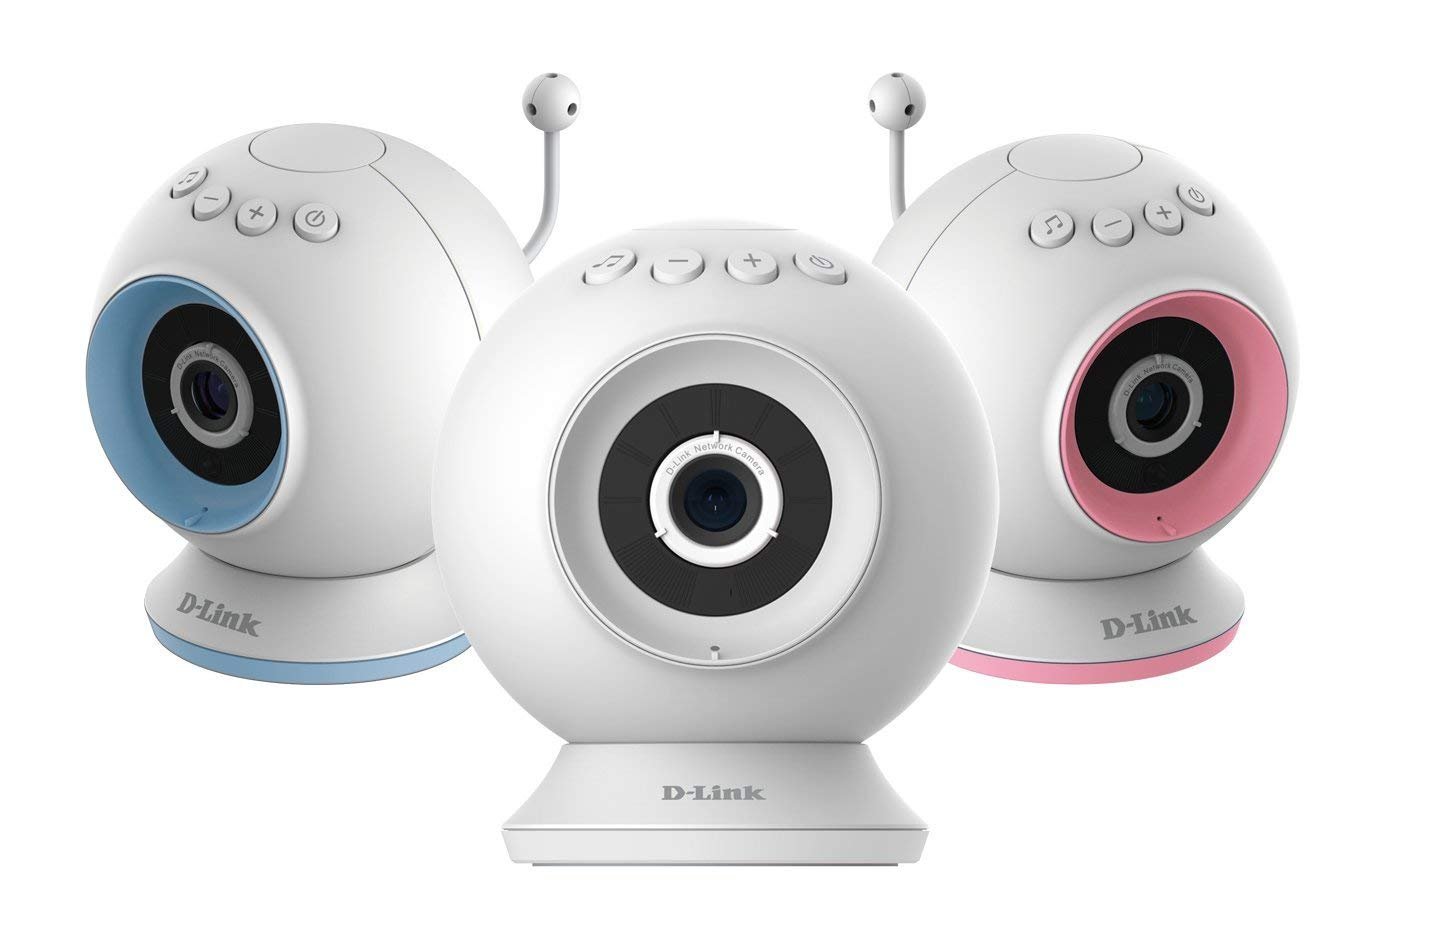 D-Link DCS-825L HD WiFi Baby Camera - Temperature Sensor, Personalize Audio, 2-Way Talk, Local and Remote Video Baby Monitor app for iPhone and Android - image 2 of 15